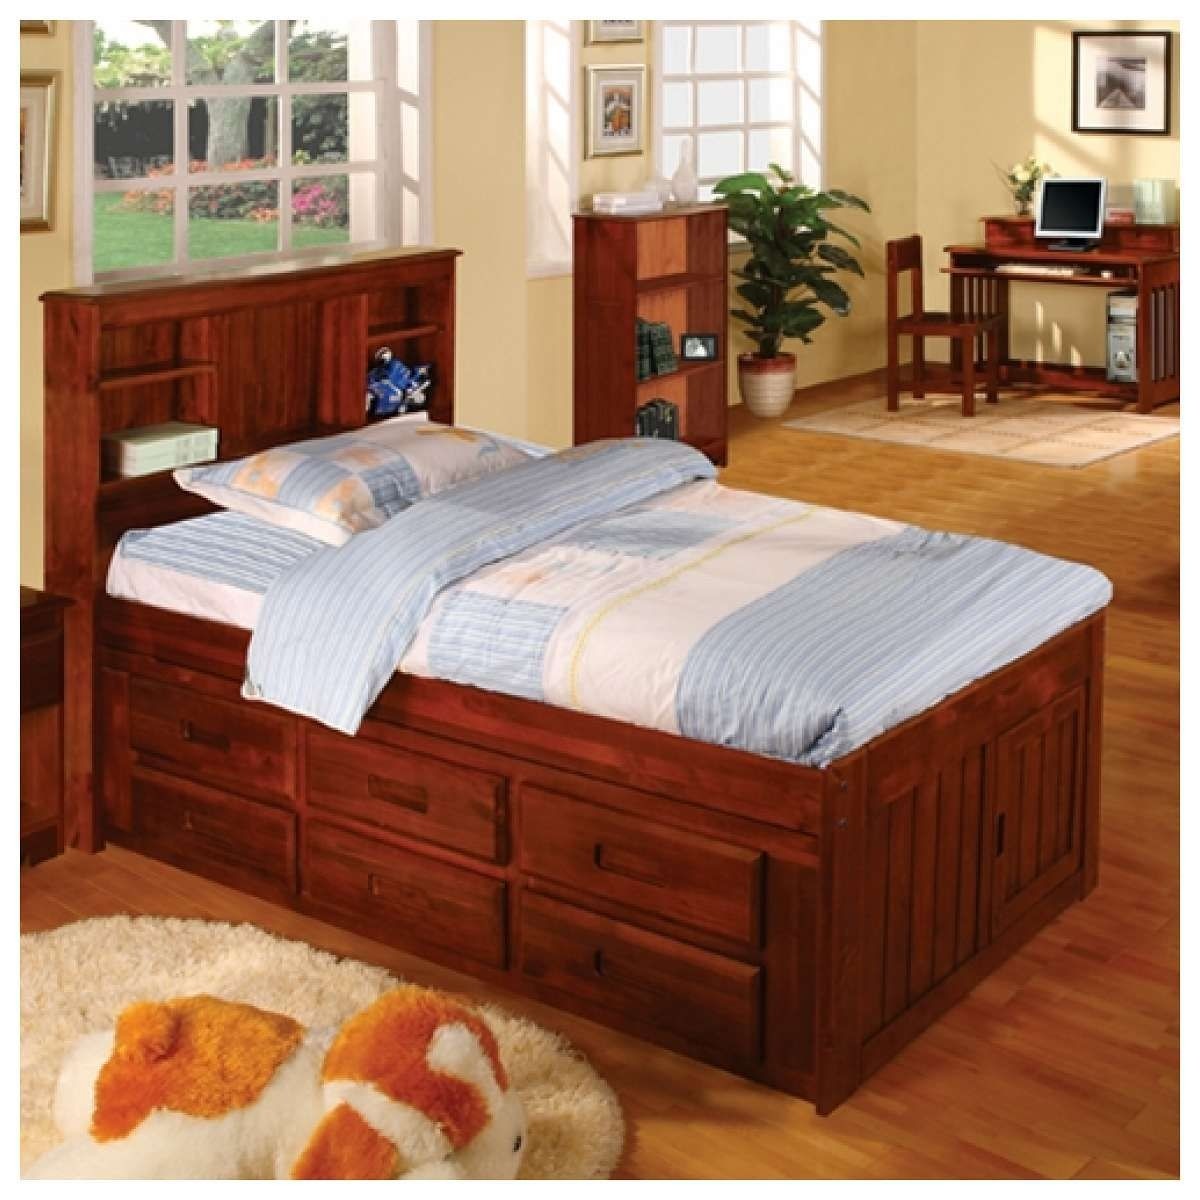 Discovery World Furniture Merlot Twin Bookcase Captain's Bed